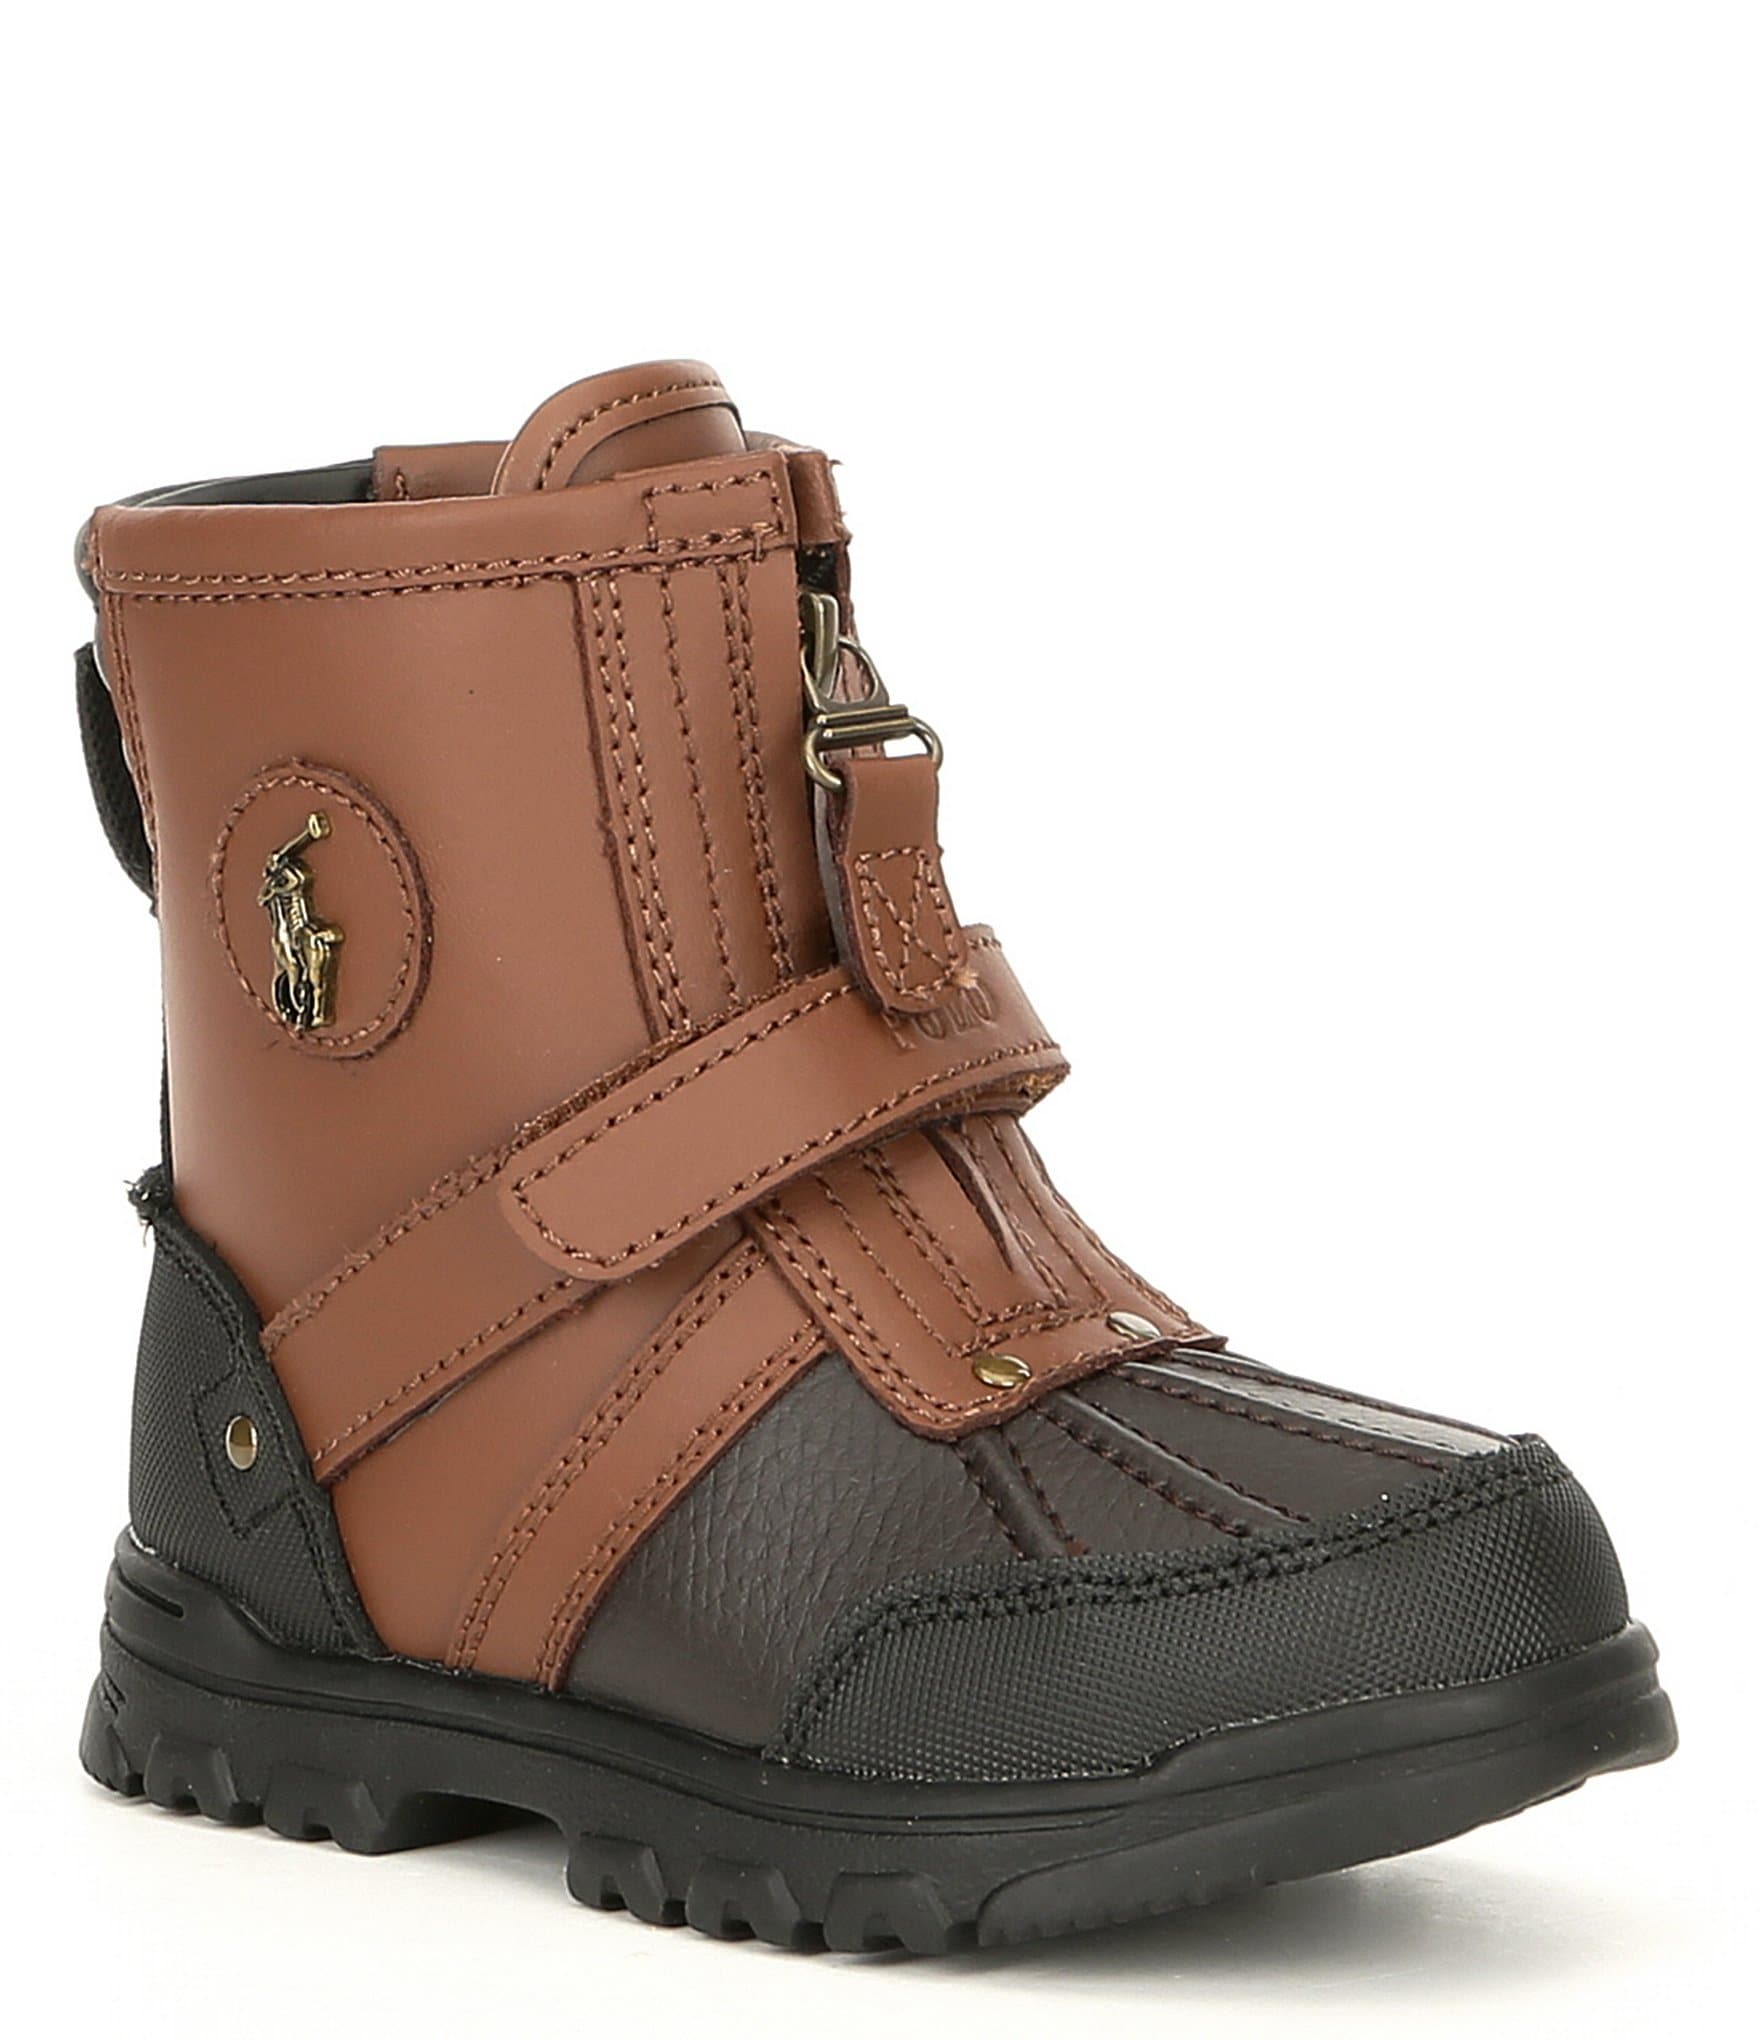 infant polo boots, OFF 78%,Latest trends,